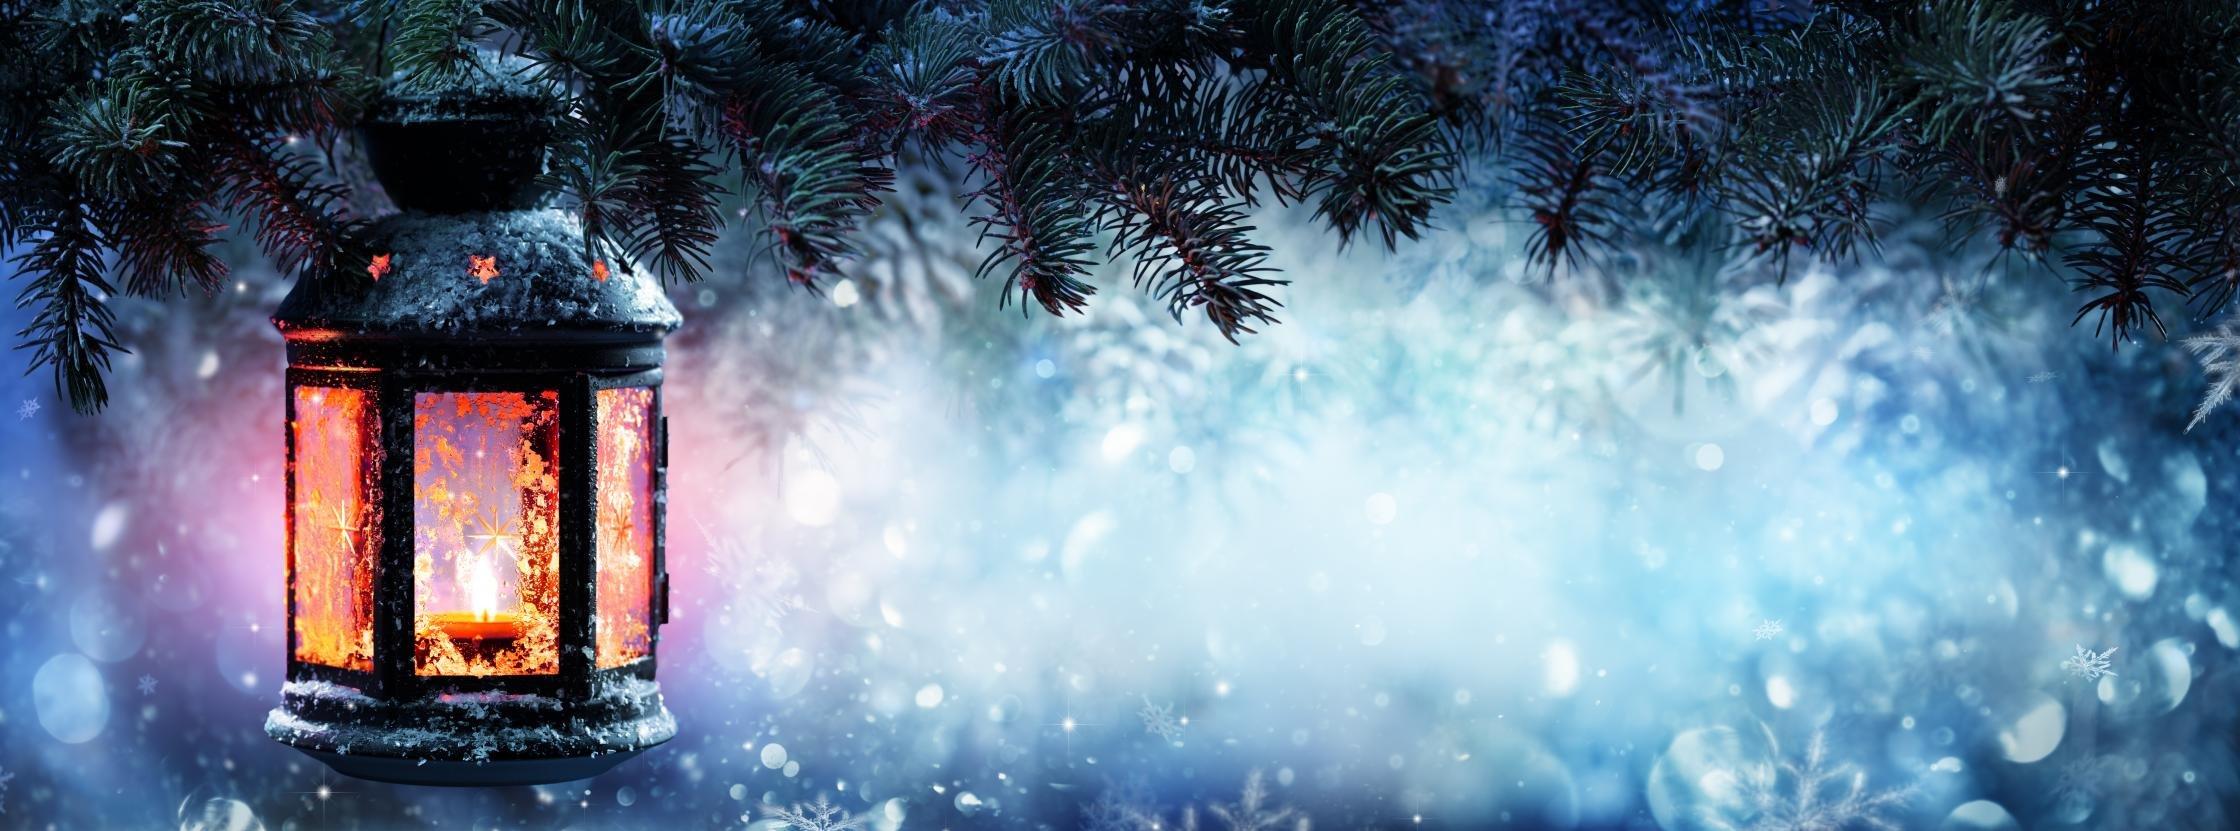 Dual Monitor Holiday Wallpaper HD Background